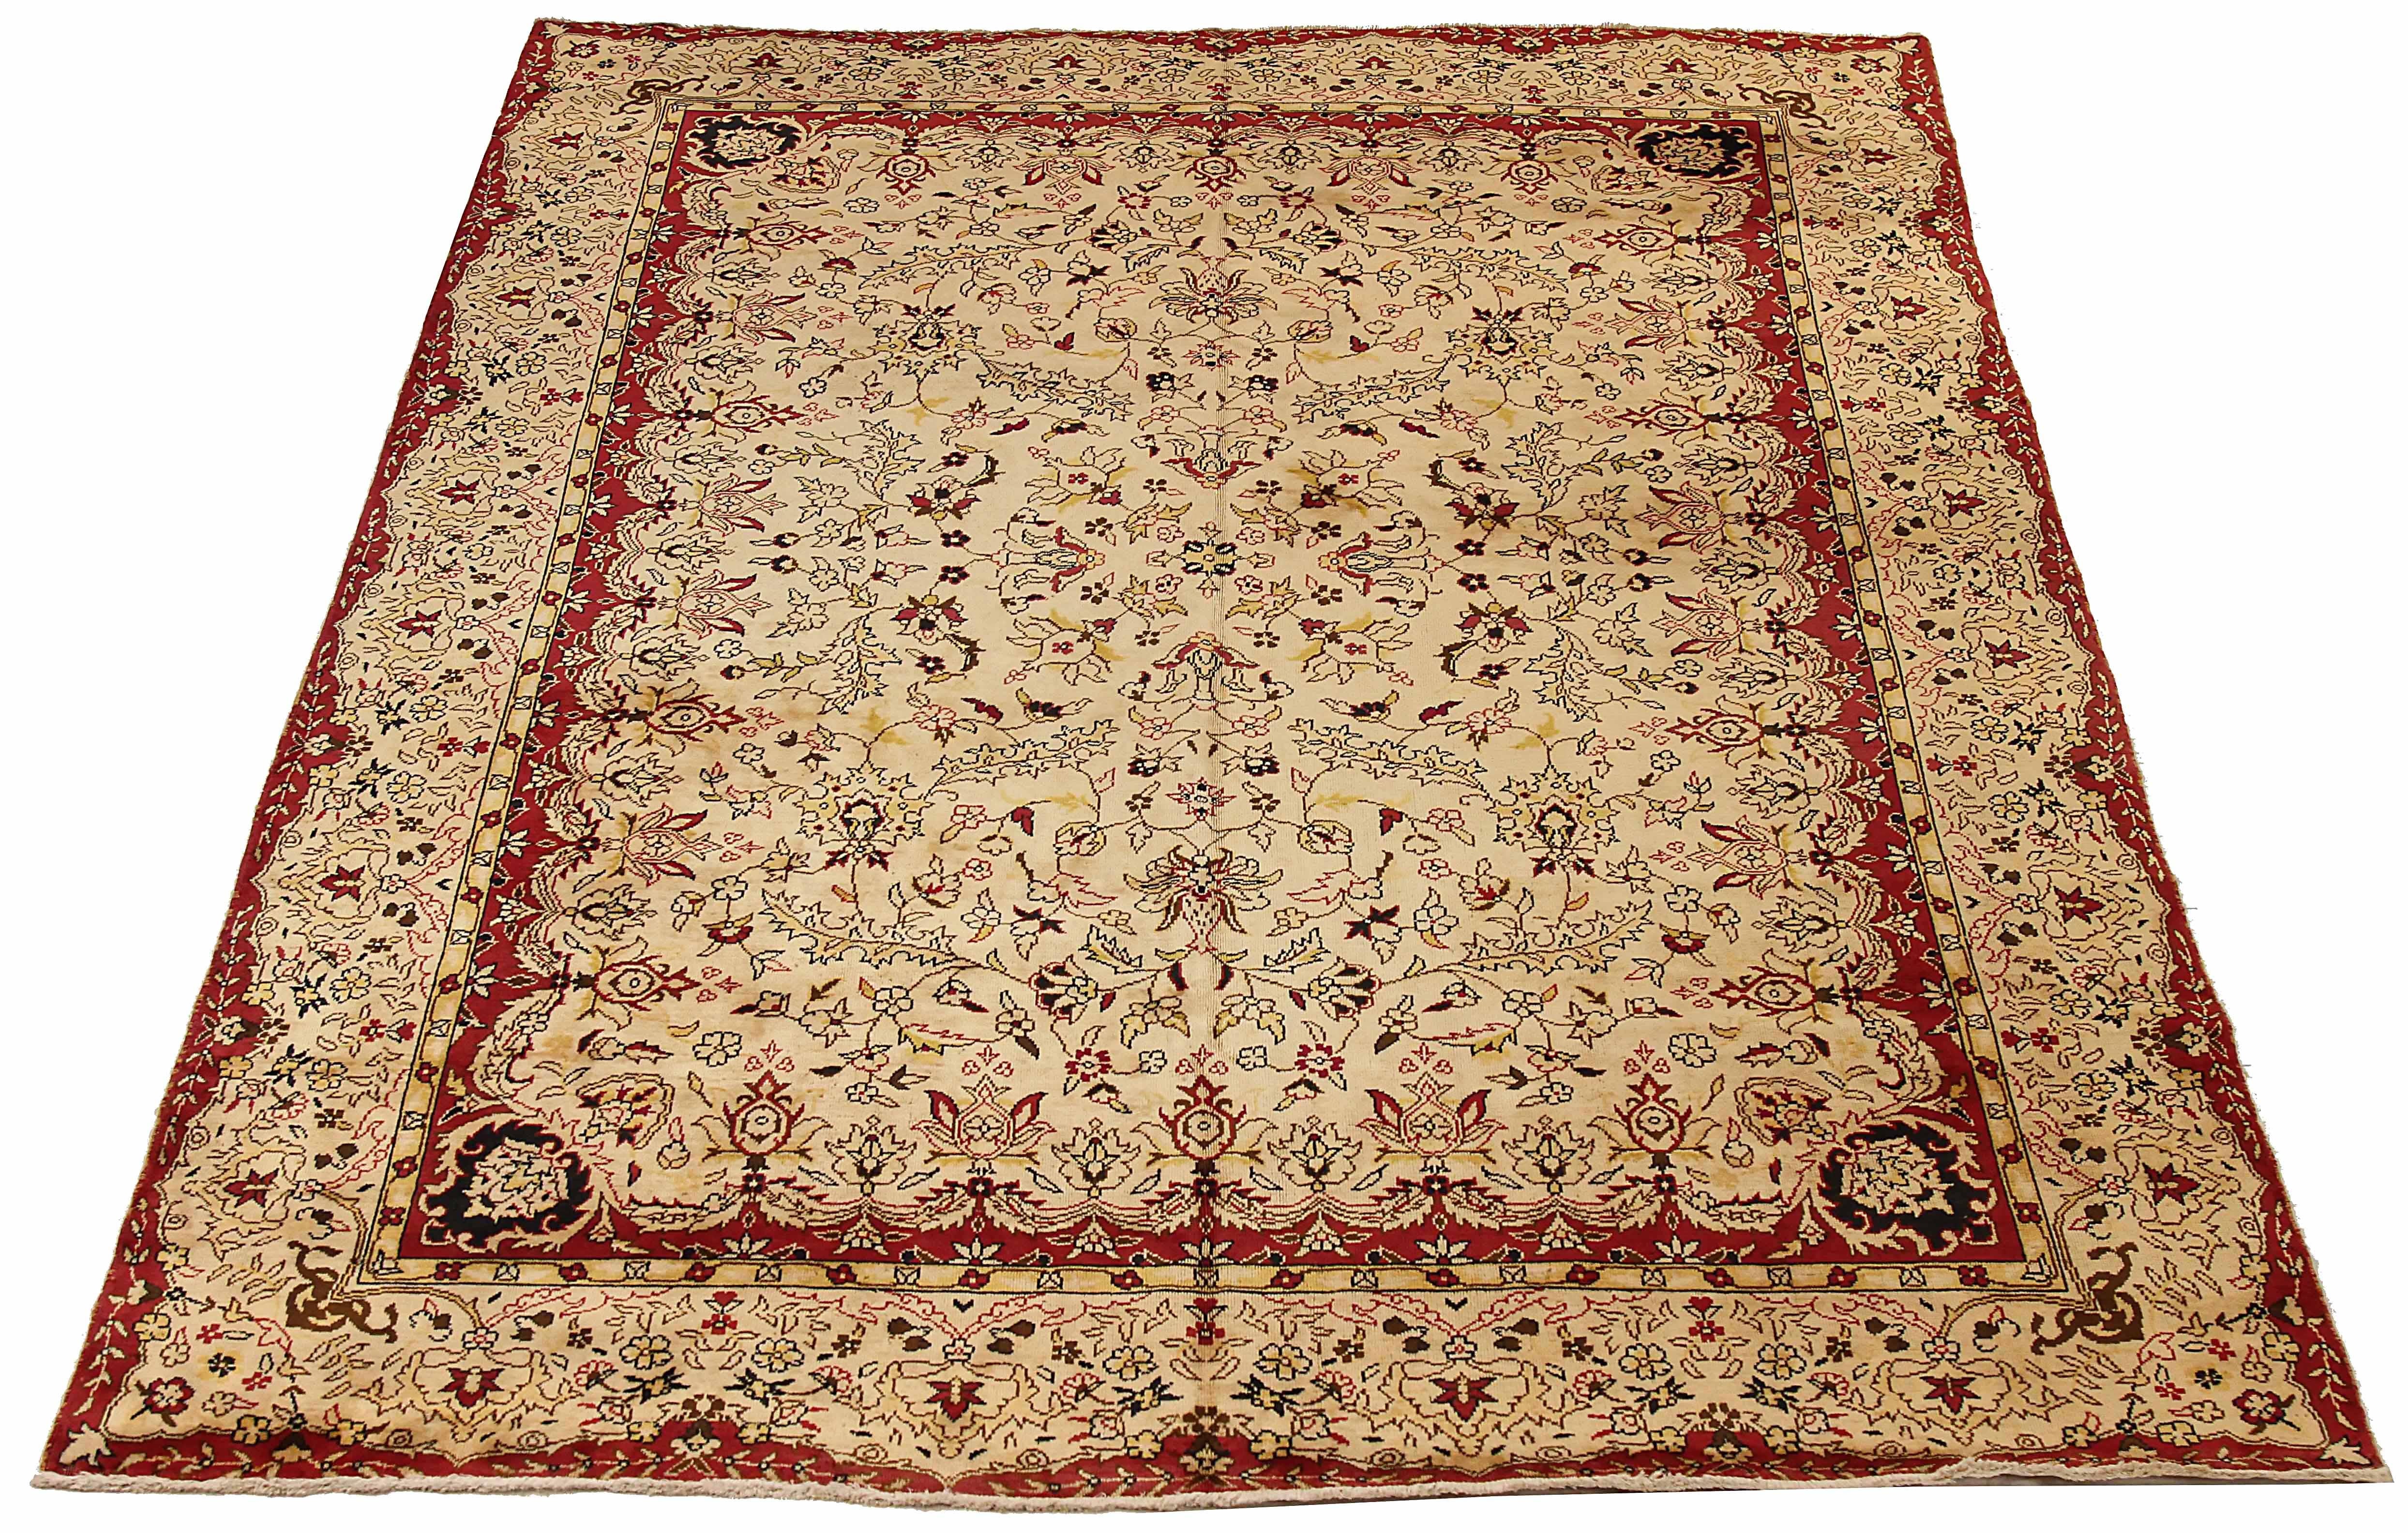 Antique Russian area rug handwoven from the finest sheep’s wool. It’s colored with all-natural vegetable dyes that are safe for humans and pets. It’s a traditional Tabriz design handwoven by expert artisans. It’s a lovely area rug that can be